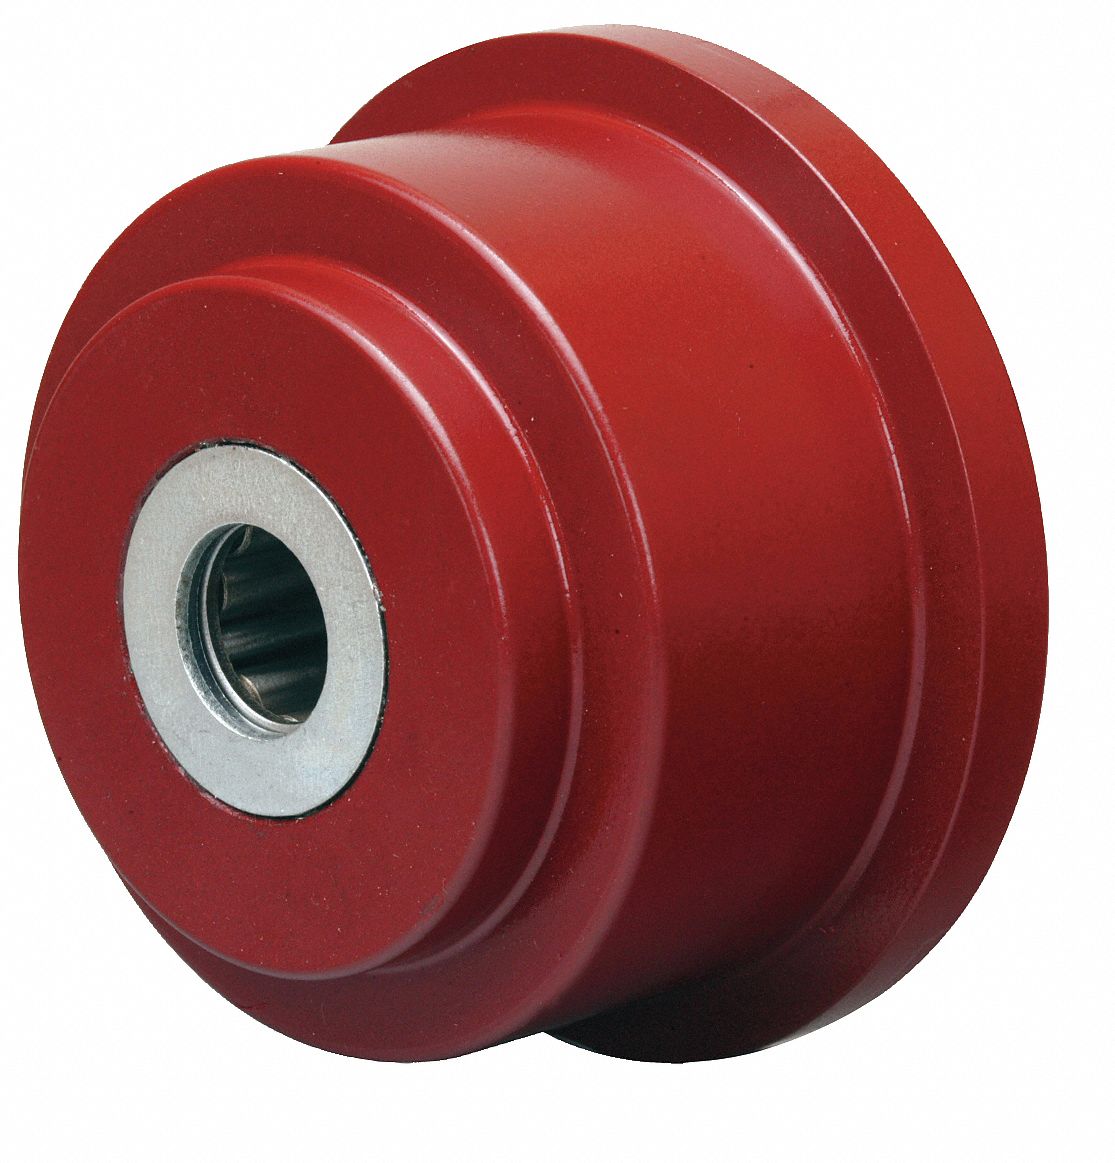 Single Flanged Track Wheel 4-15/16 Diameter x 1-7/16 Face x 2-1/4 Hub length with 3/4 Roller Bearing 